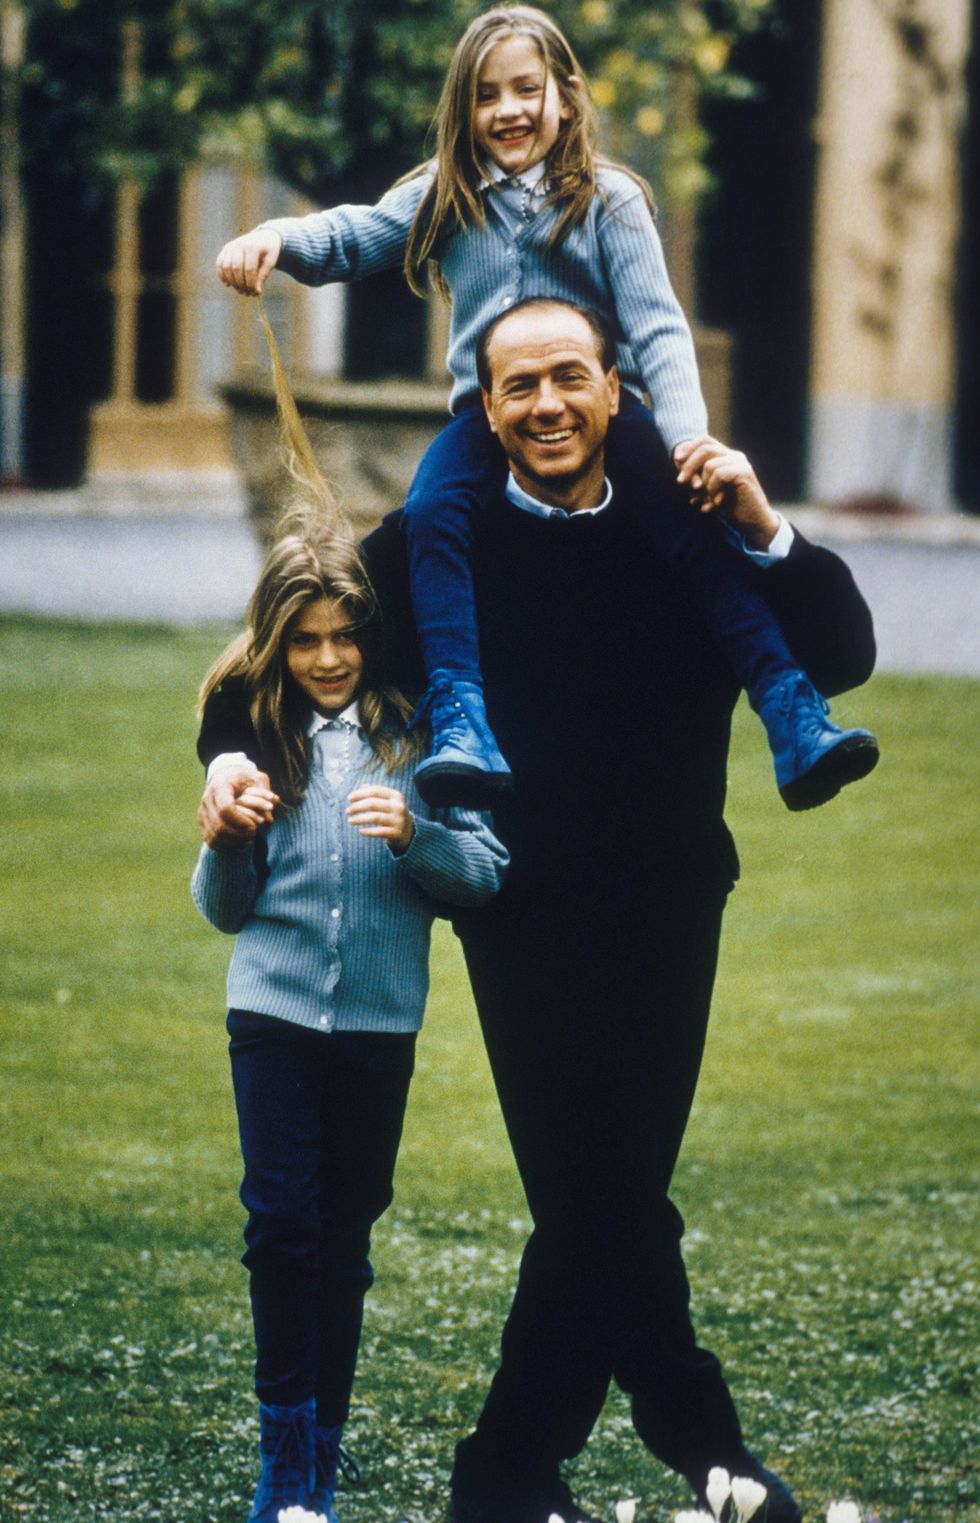 milan, italy january 01 a young silvio berlusconi in the garden of his villa near milan, with his daughters barbara l and eleonora whom he had from his second wife veronica lario in 1994 ca in milan, italy photo by franco origliagetty images